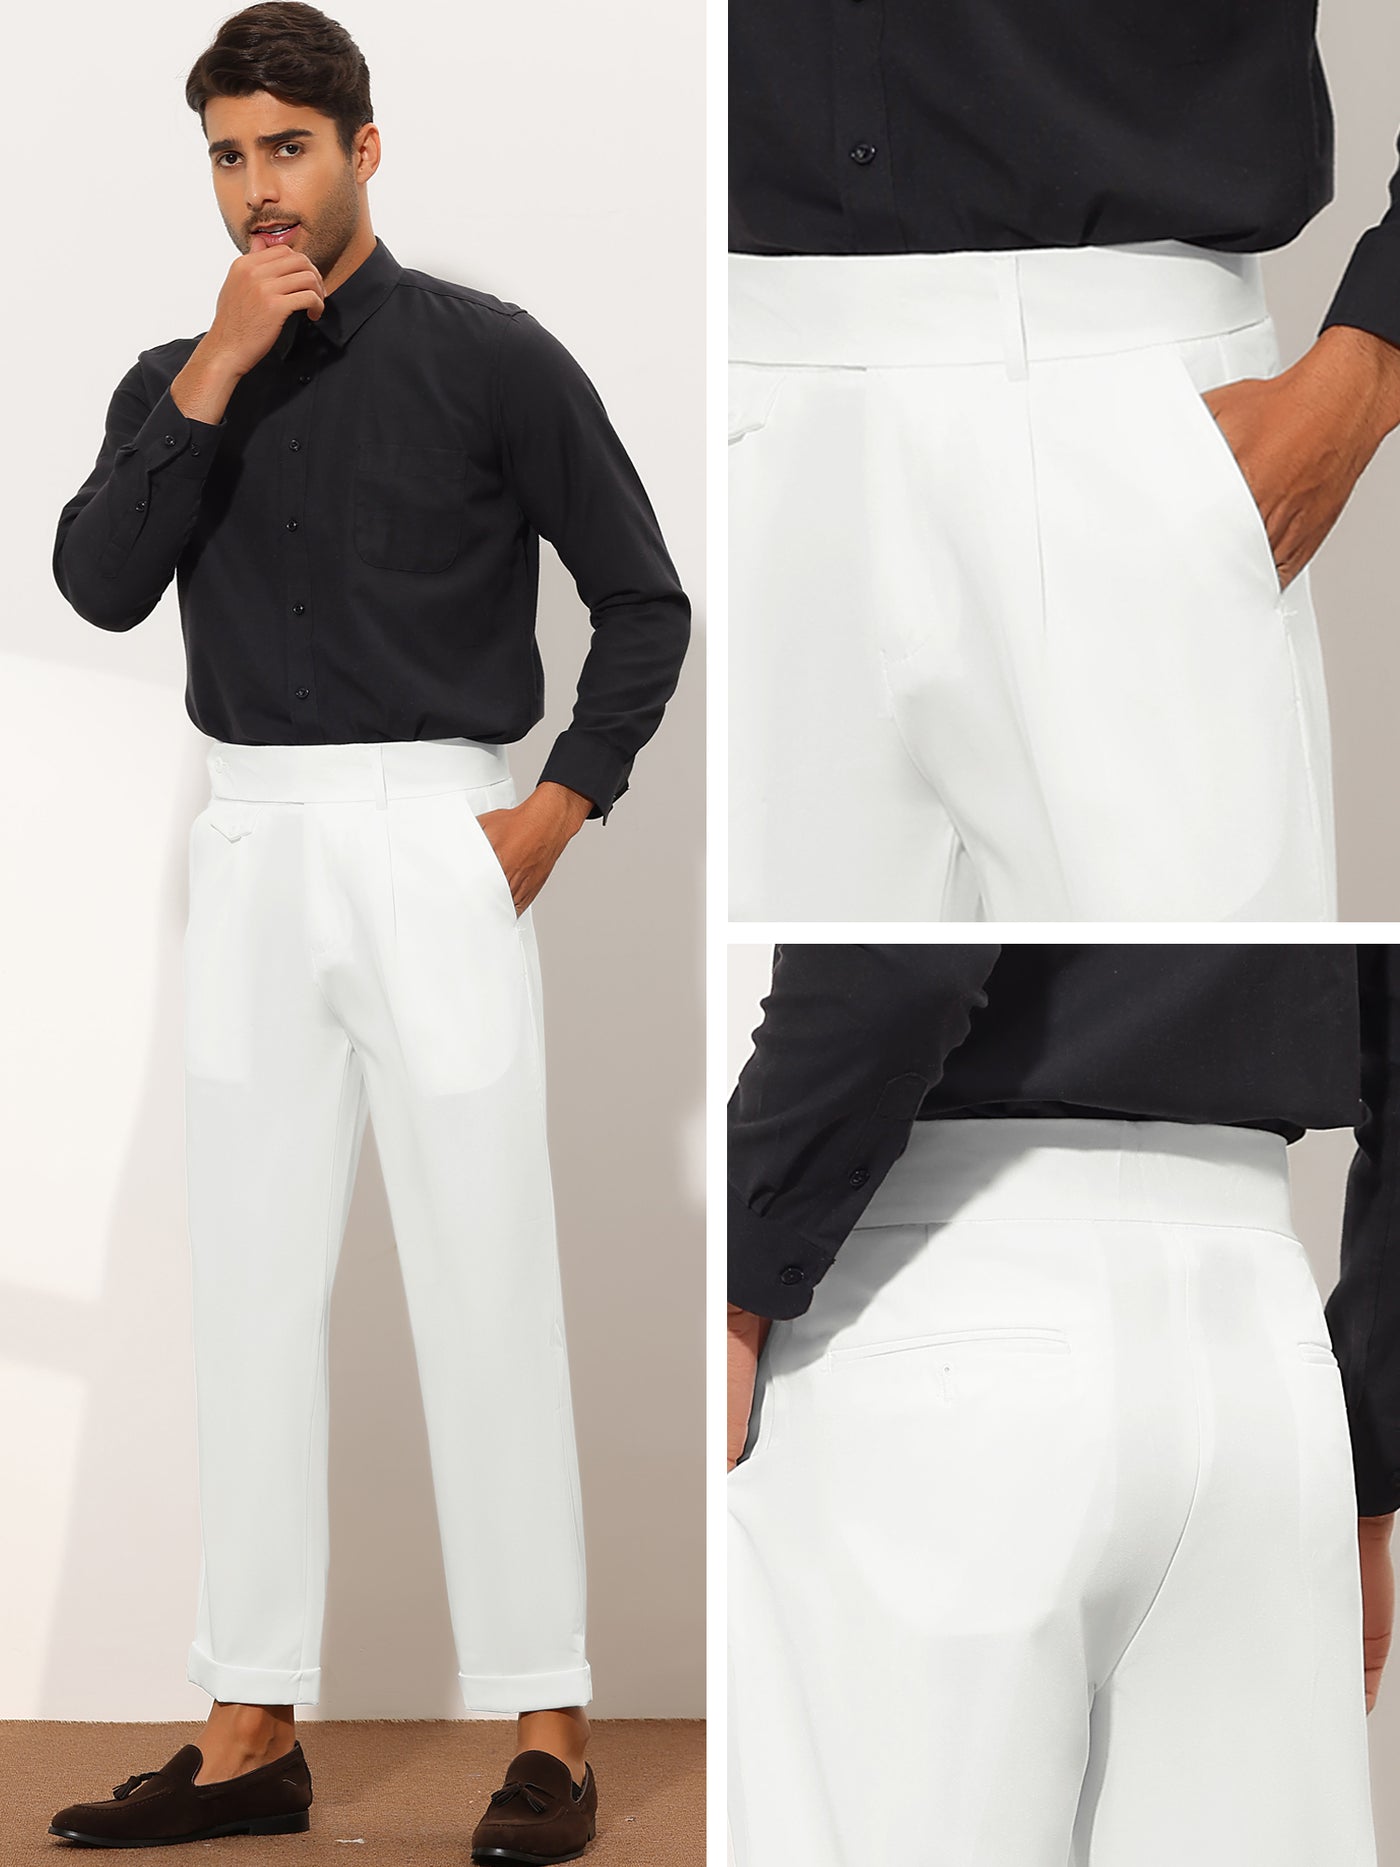 Bublédon Men's Tapered Trousers Solid Extended Waistband Dress Pants